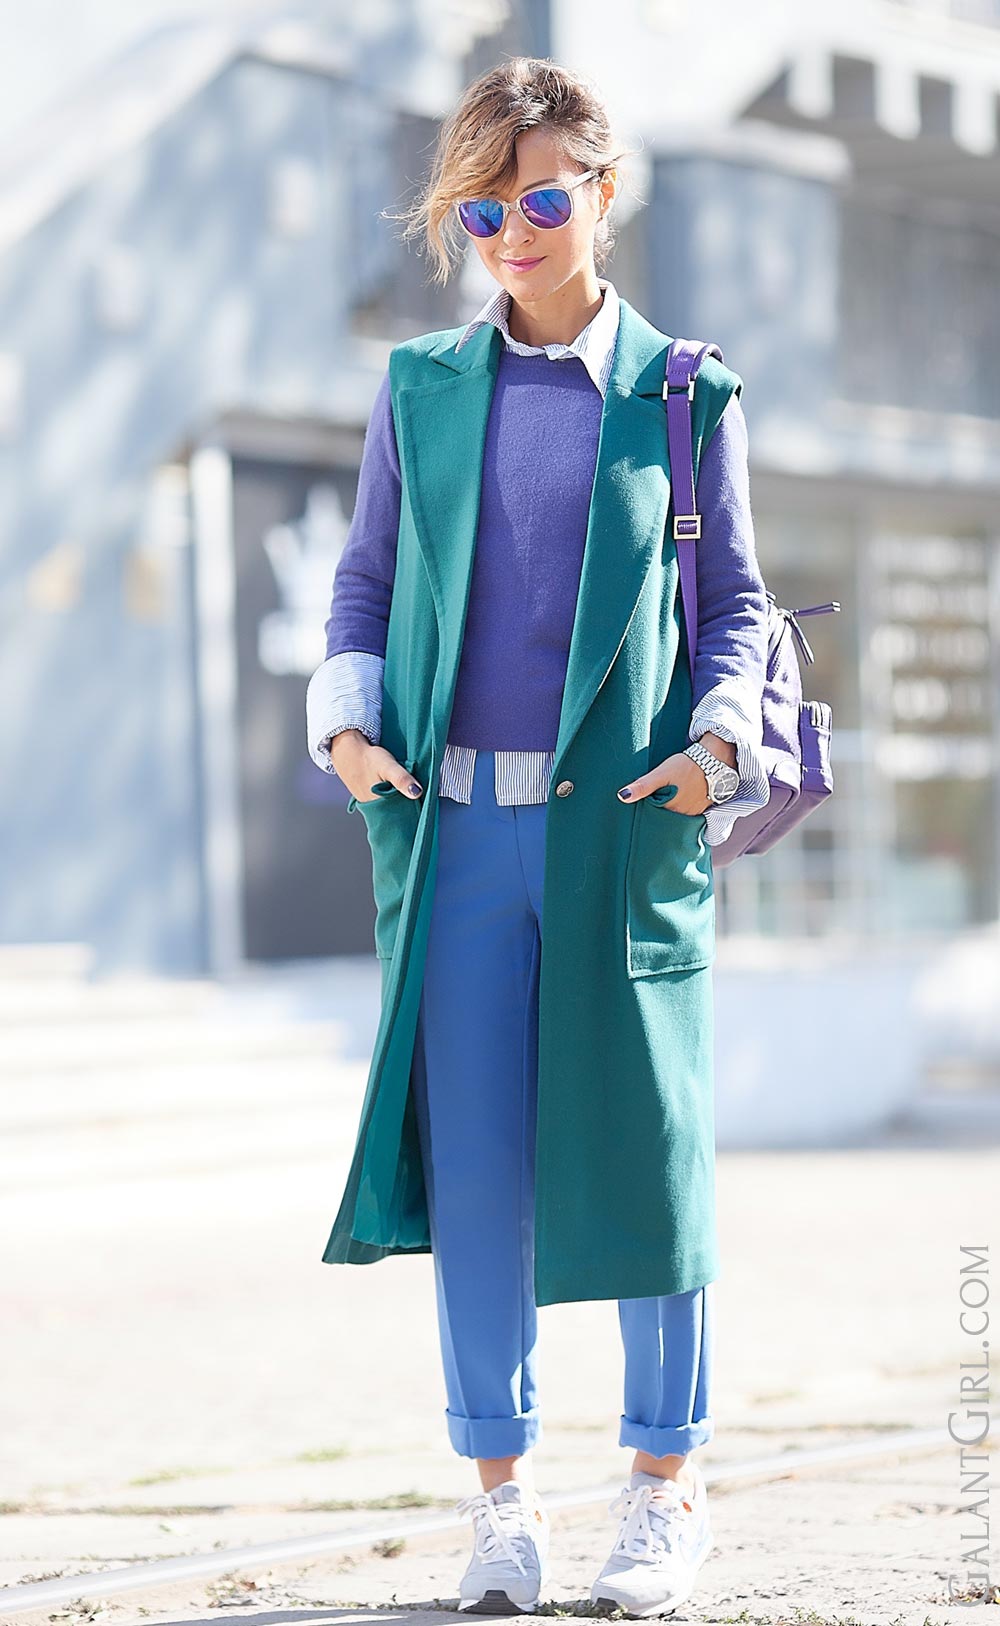 sporty+chic+style-with-waistcoat-green+colors+outfit